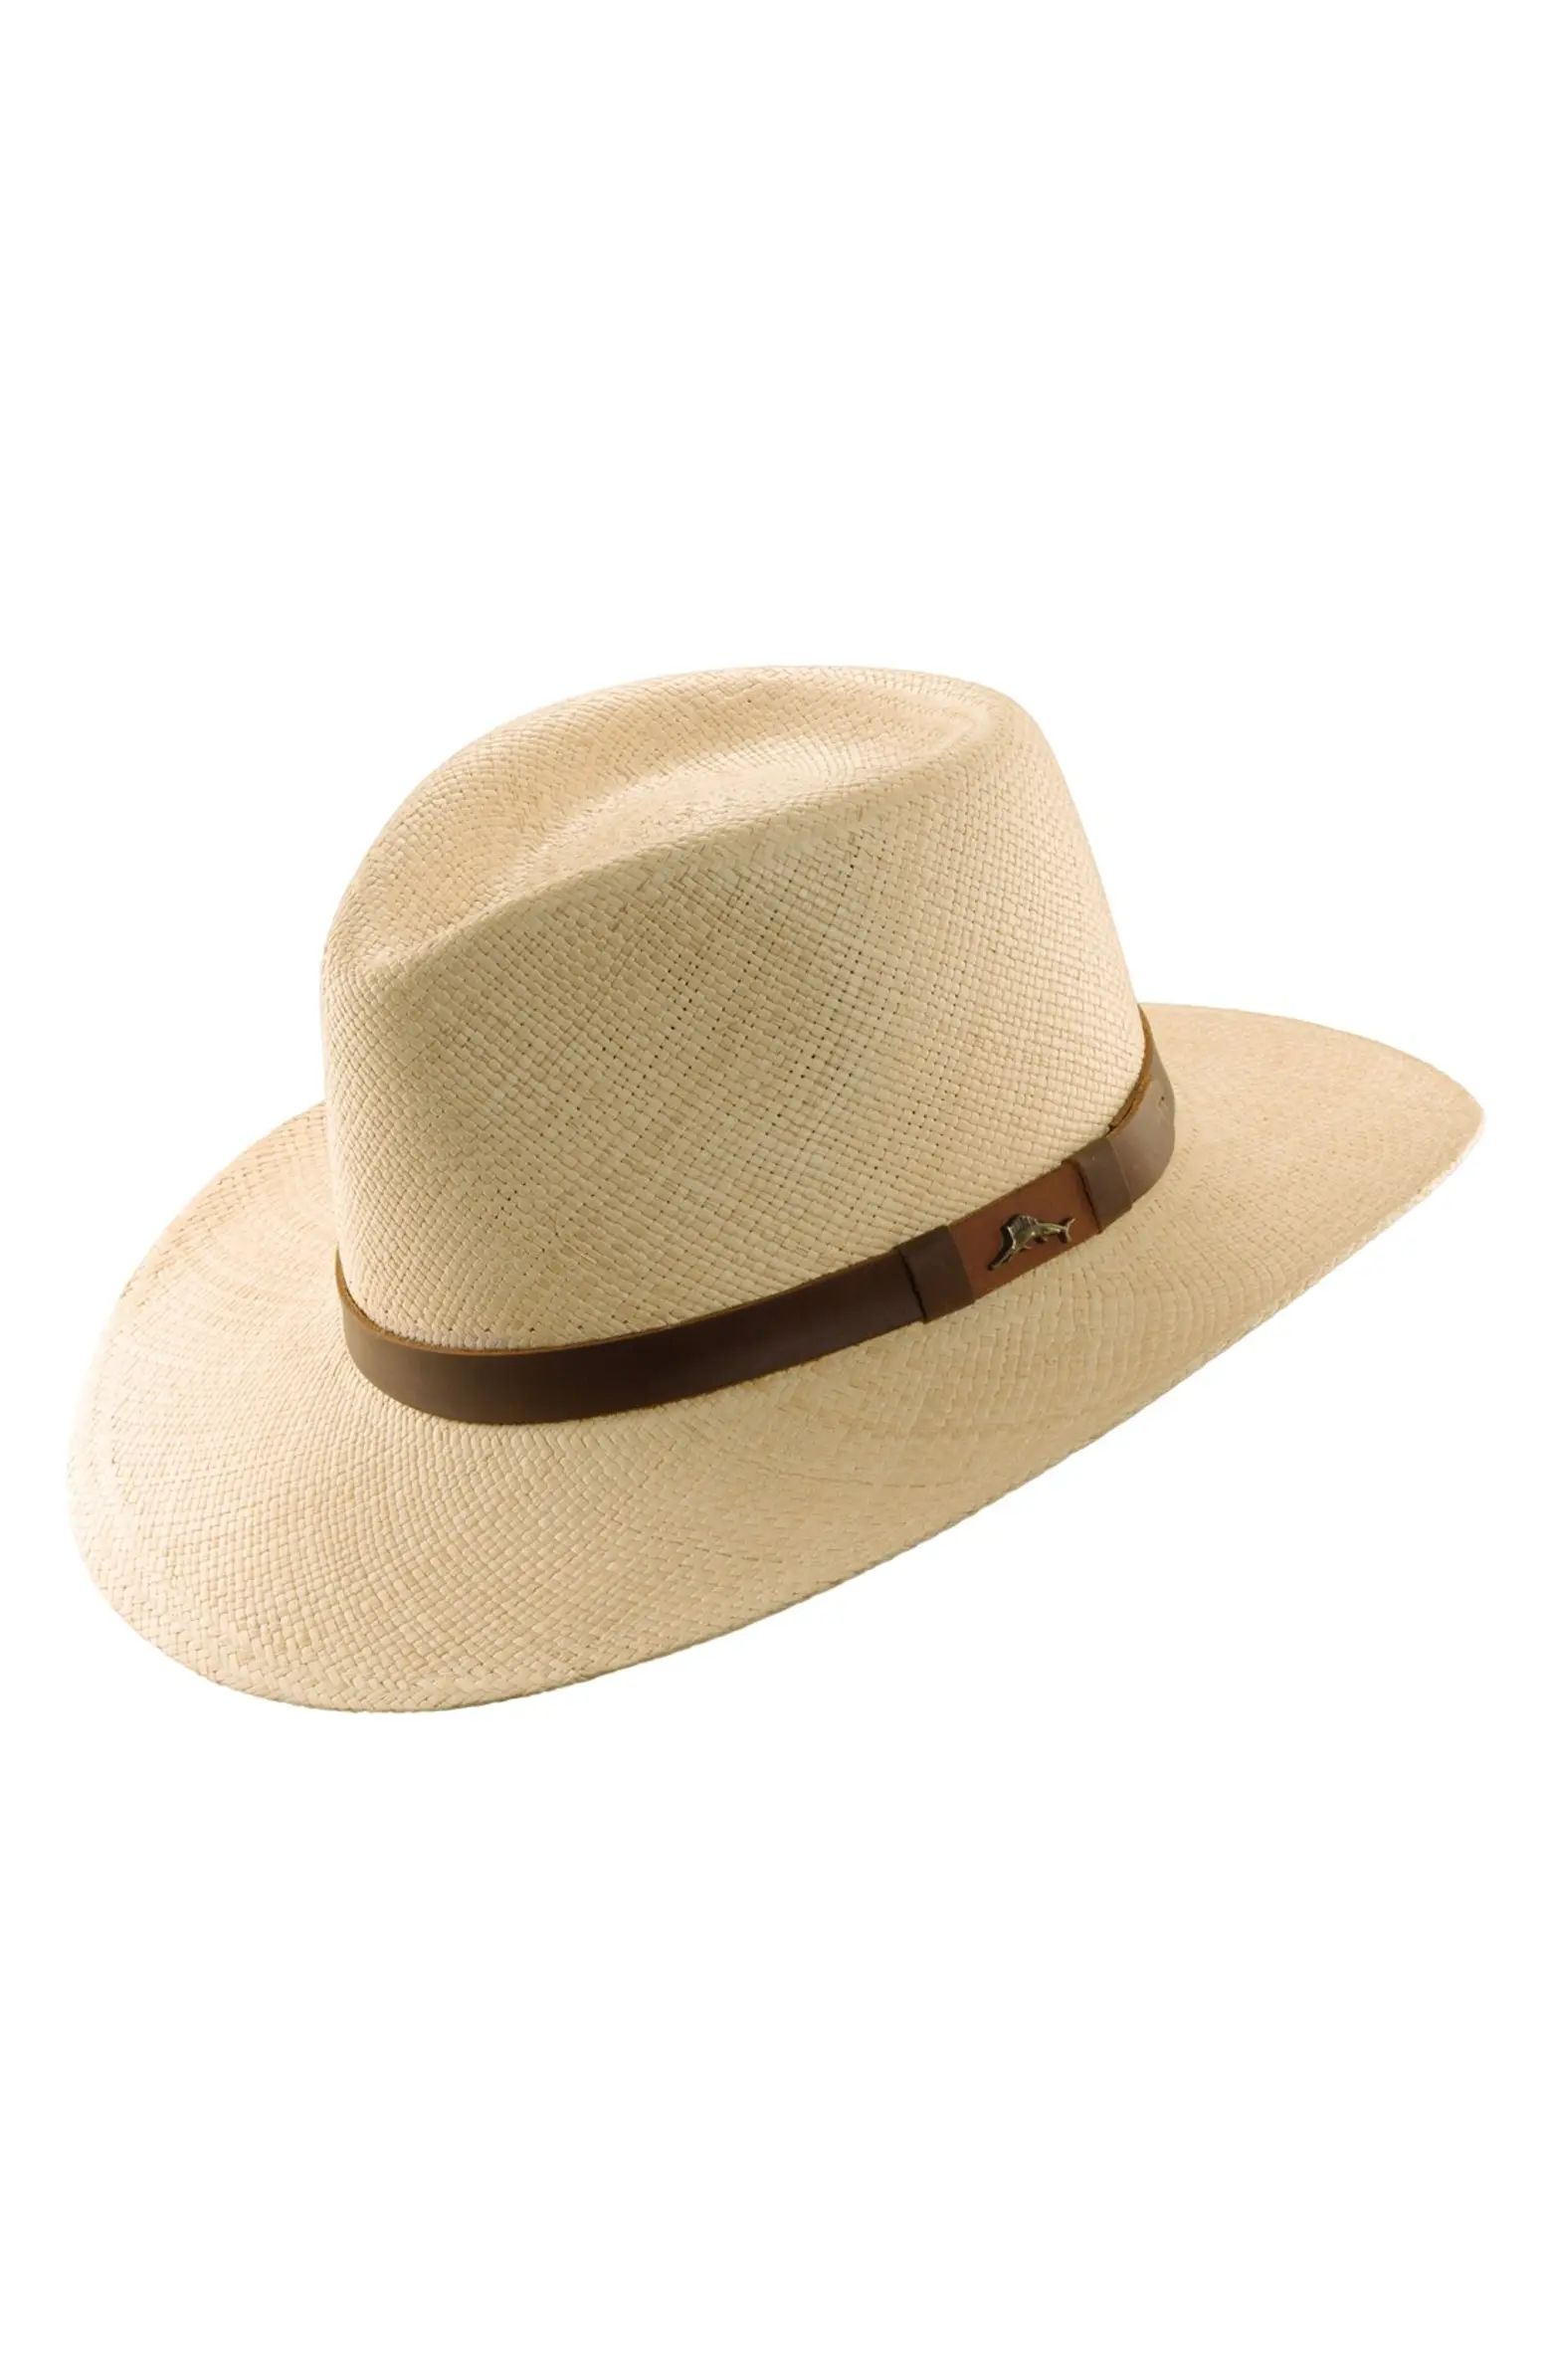 Tommy Bahama Panama Straw Outback Hat | Nordstrom | Nordstrom